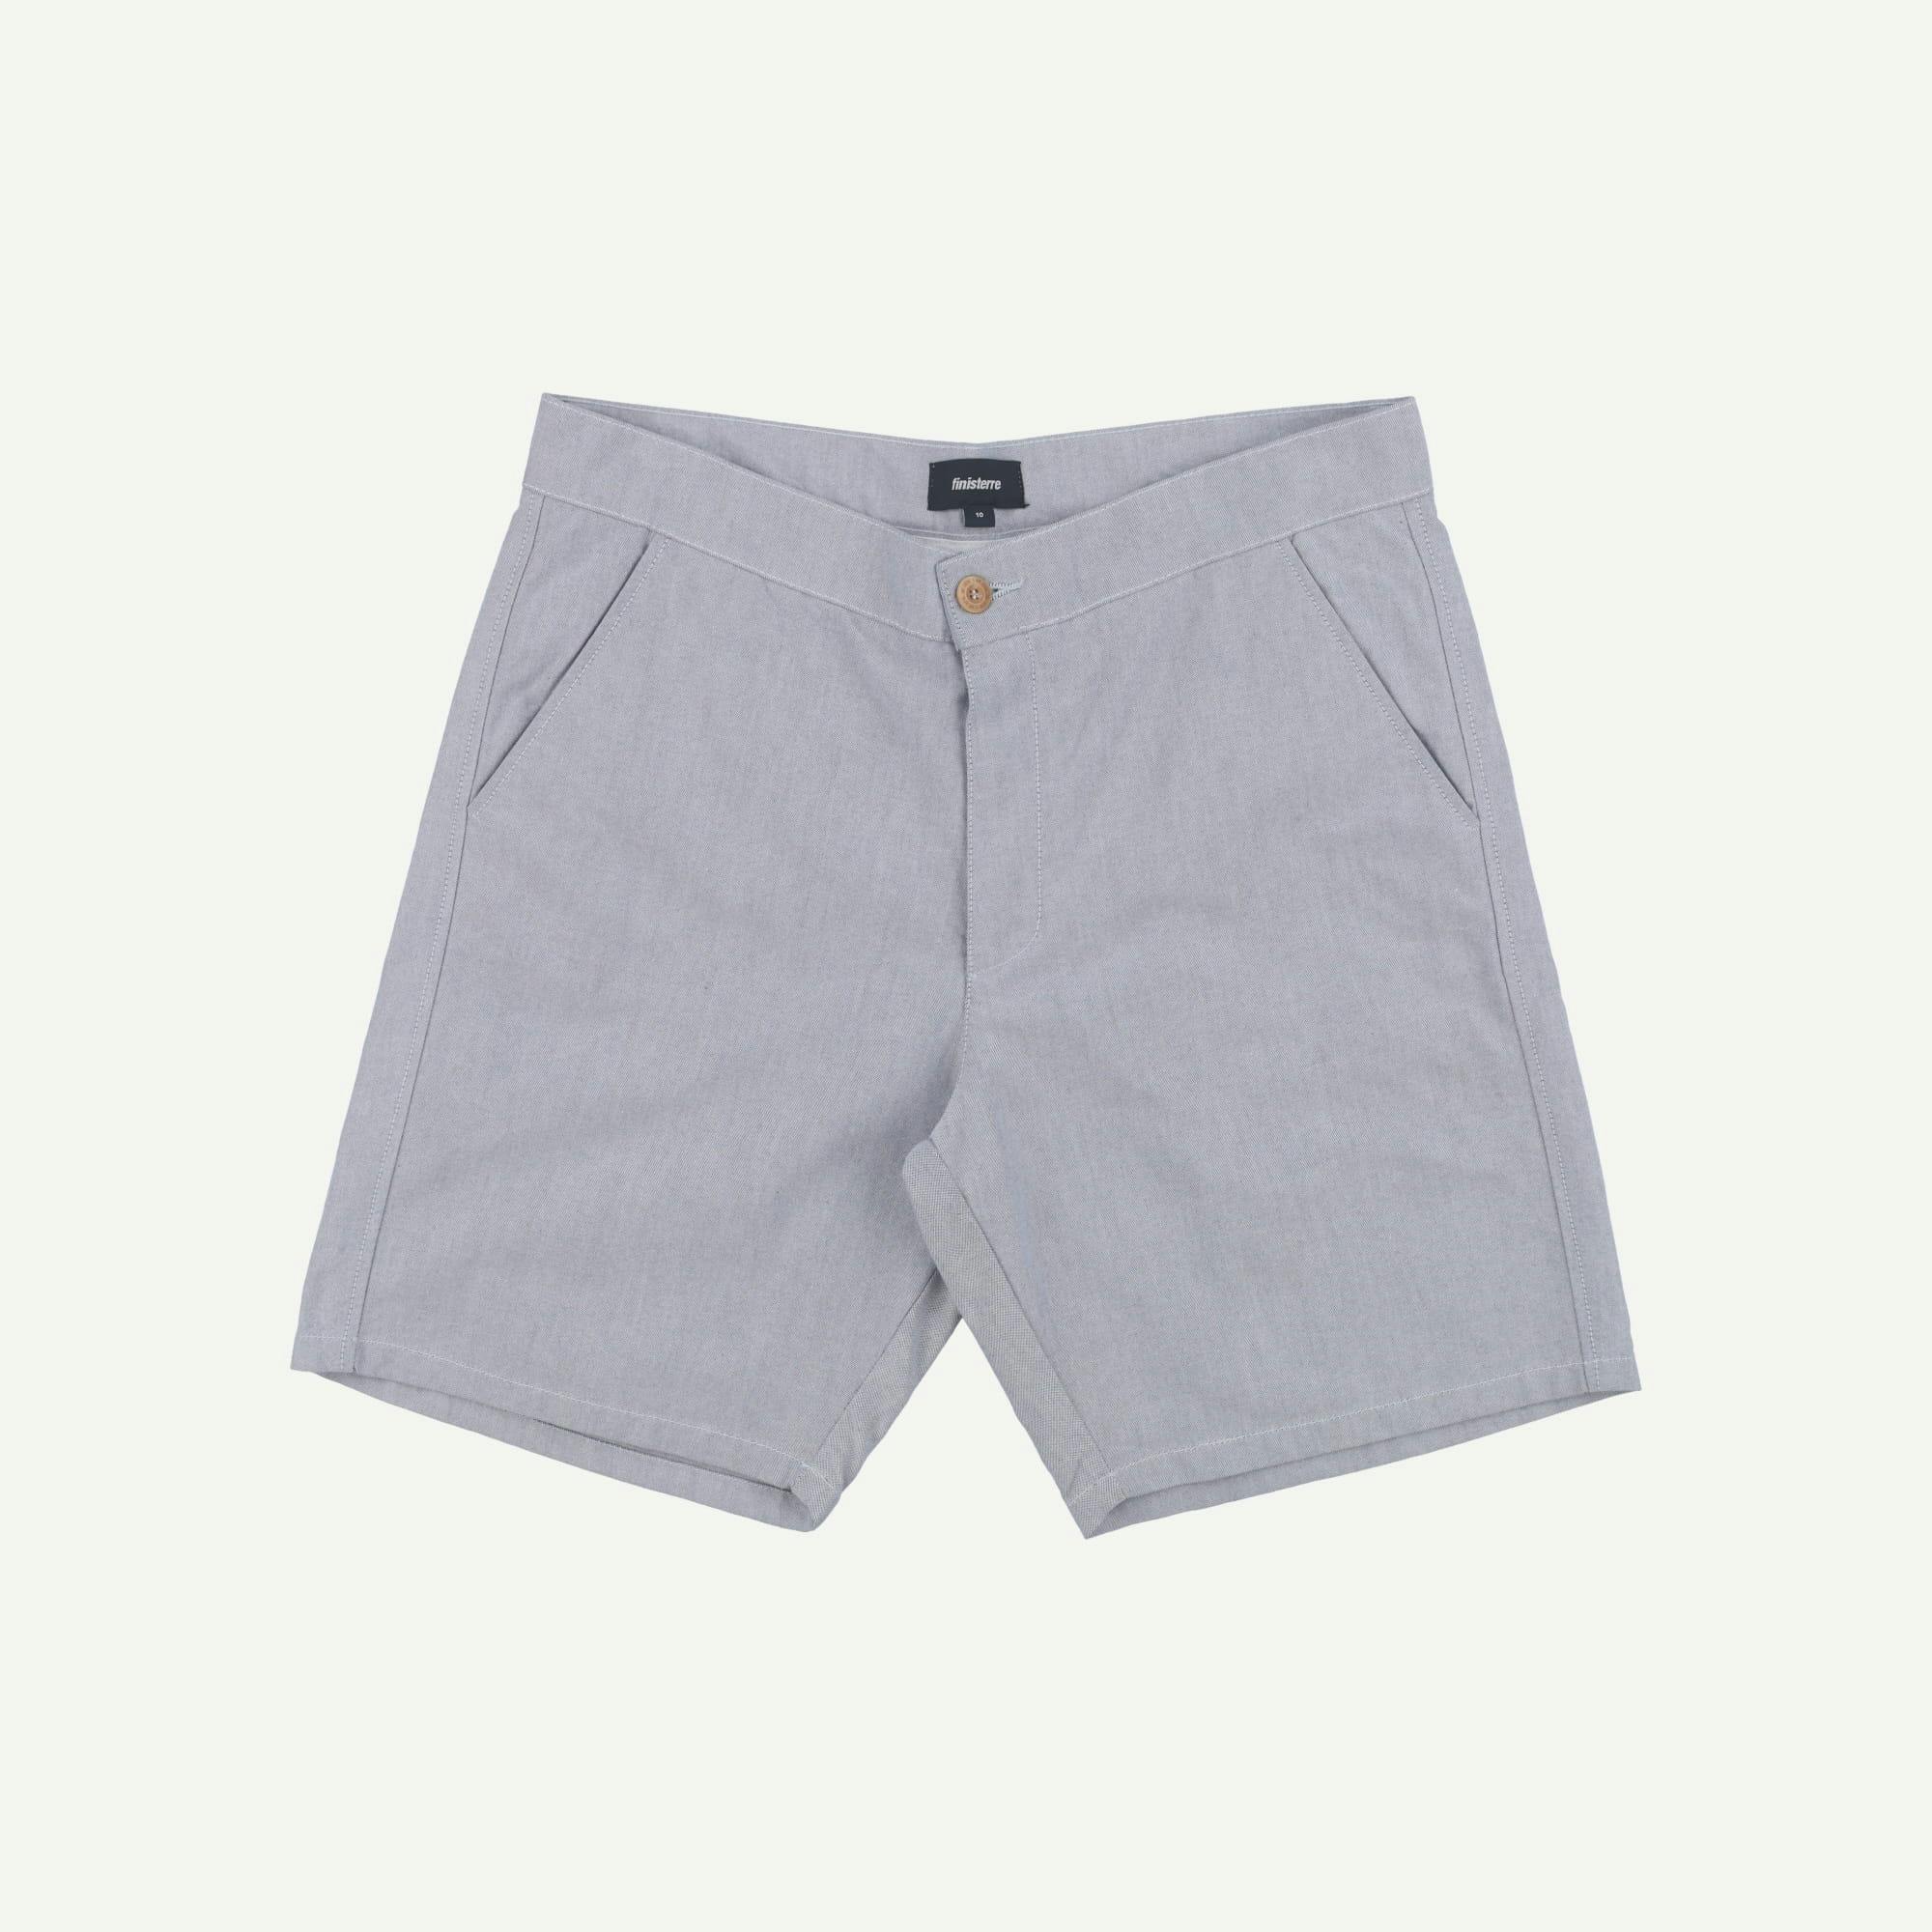 Finisterre As new Blue Shorts